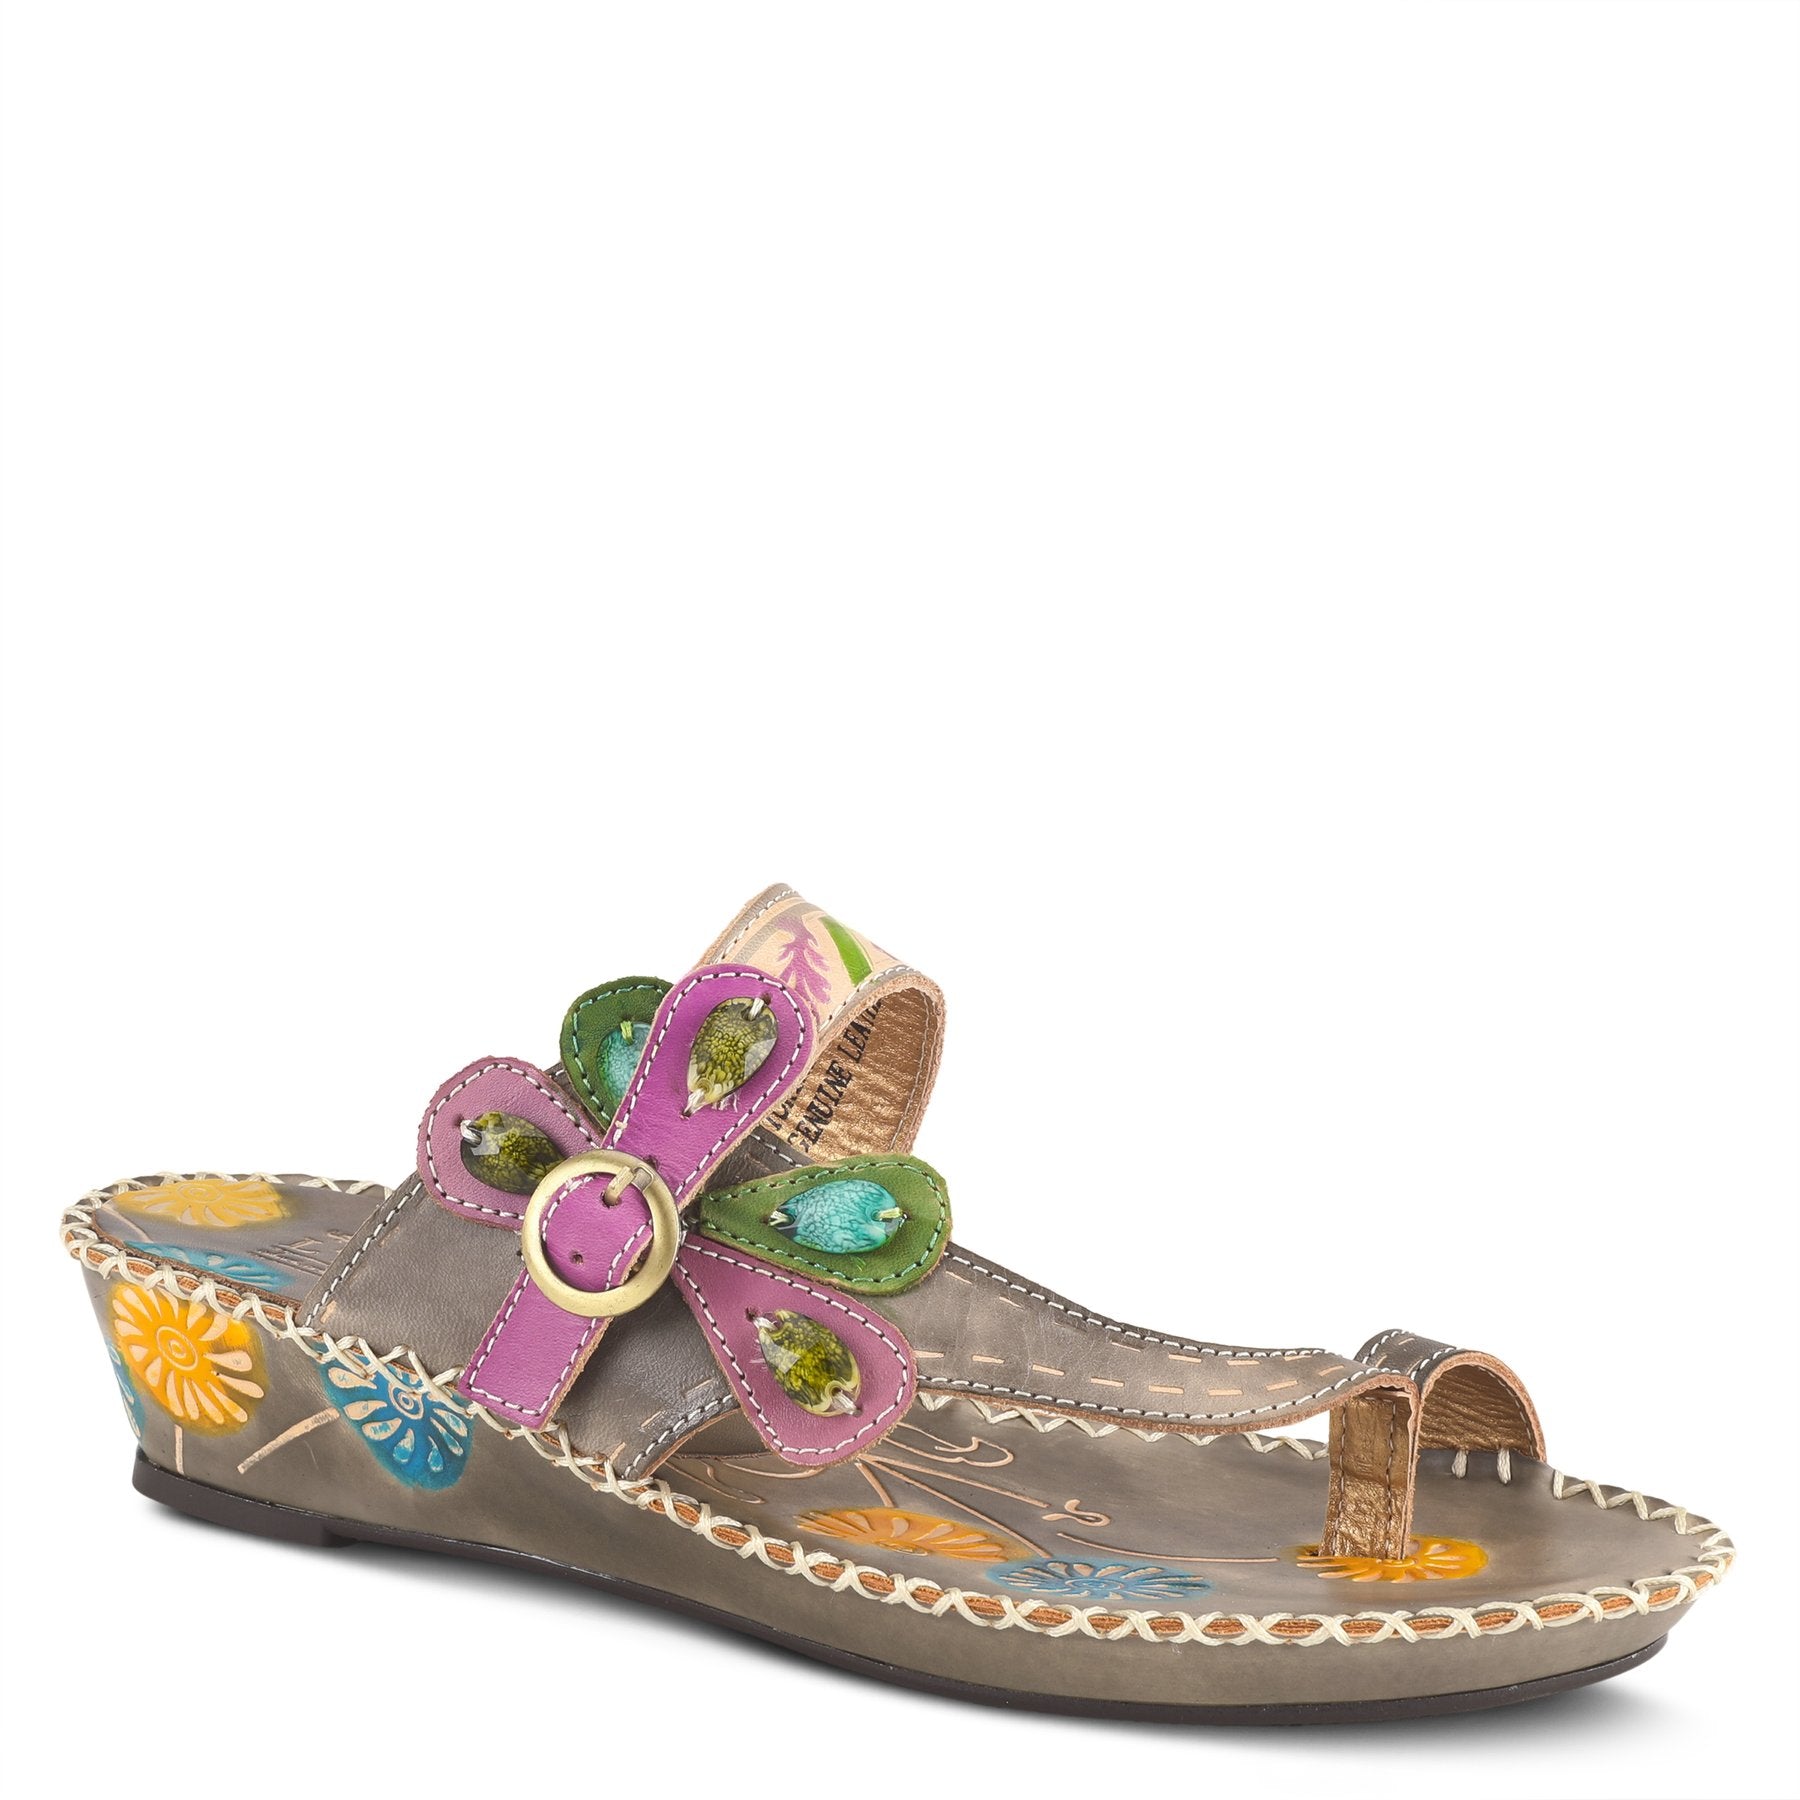 Outer front side of the l'artiste santorini slide sandal. This sandal is grey with colorful flowers painted all over the sole, a toe-ring thong, and an adjustable buckle strap.